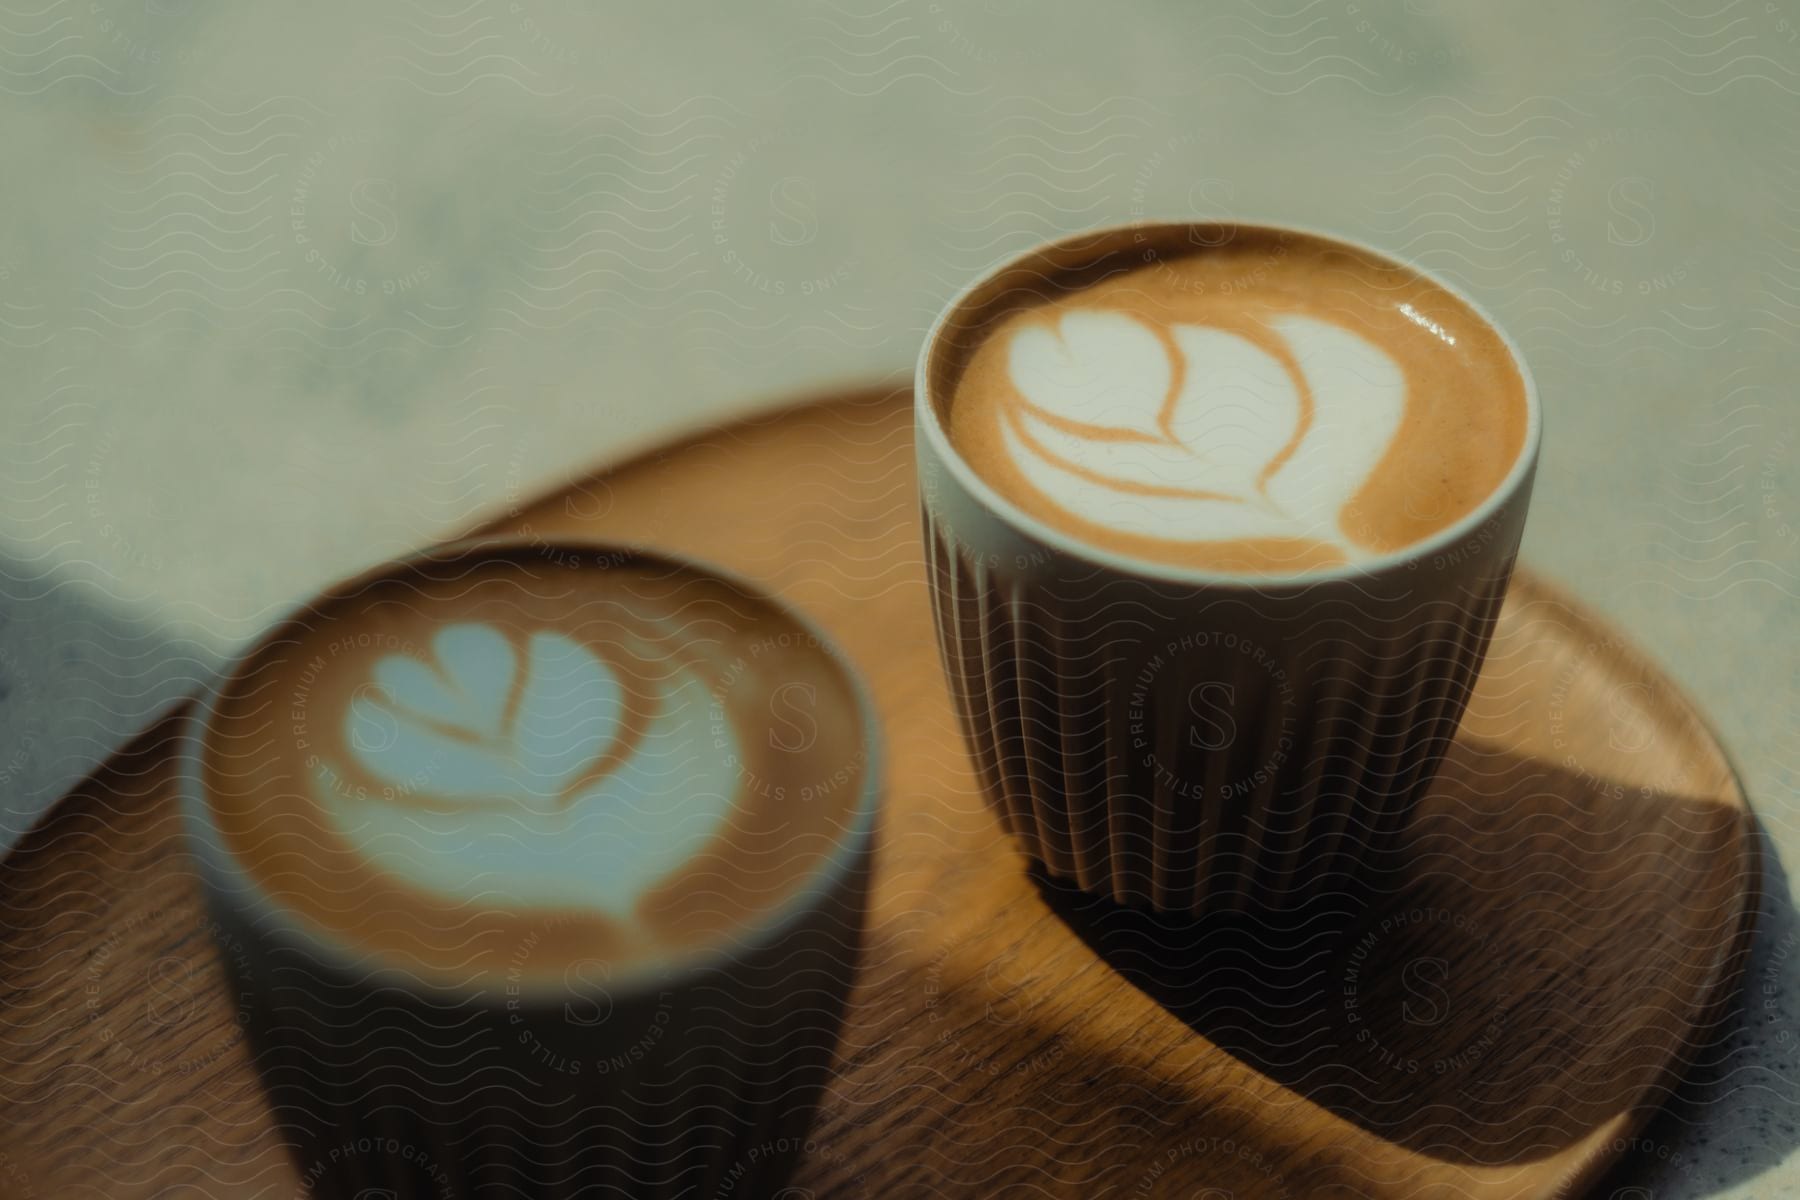 Two cups with cappuccino decorated with a flower and heart.